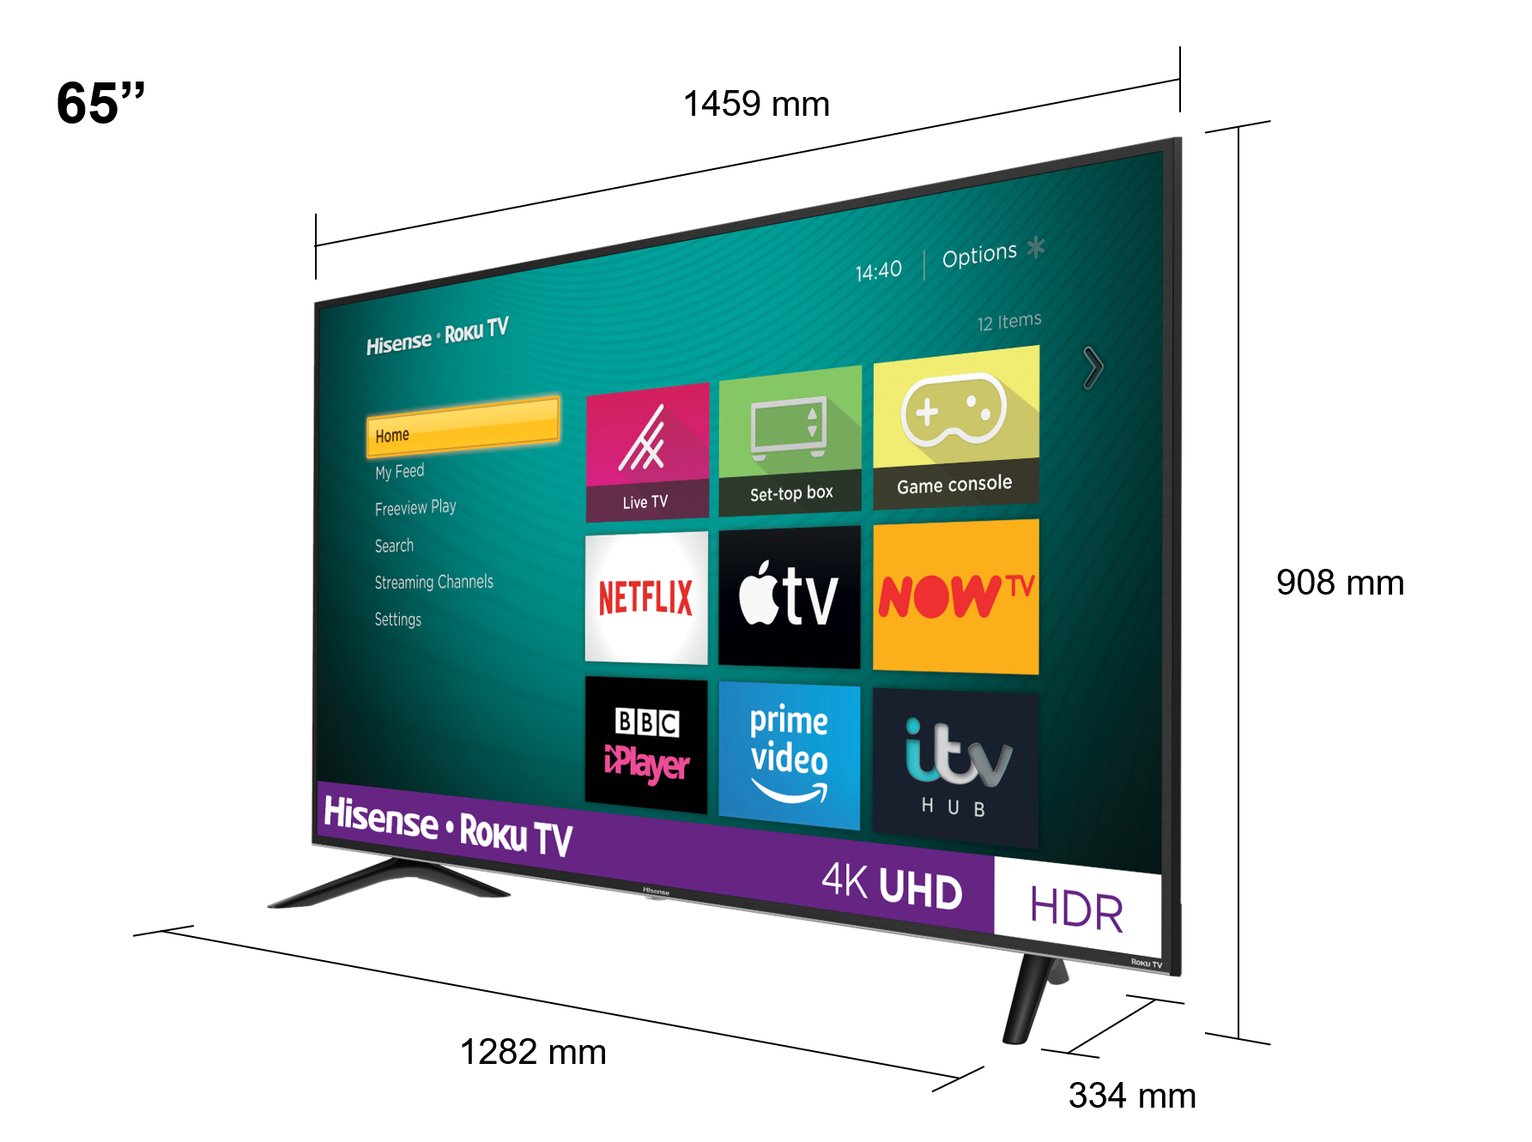 Hisense Roku TV 65 Inch R65B7120UK 4K Smart LED TV with HDR Review